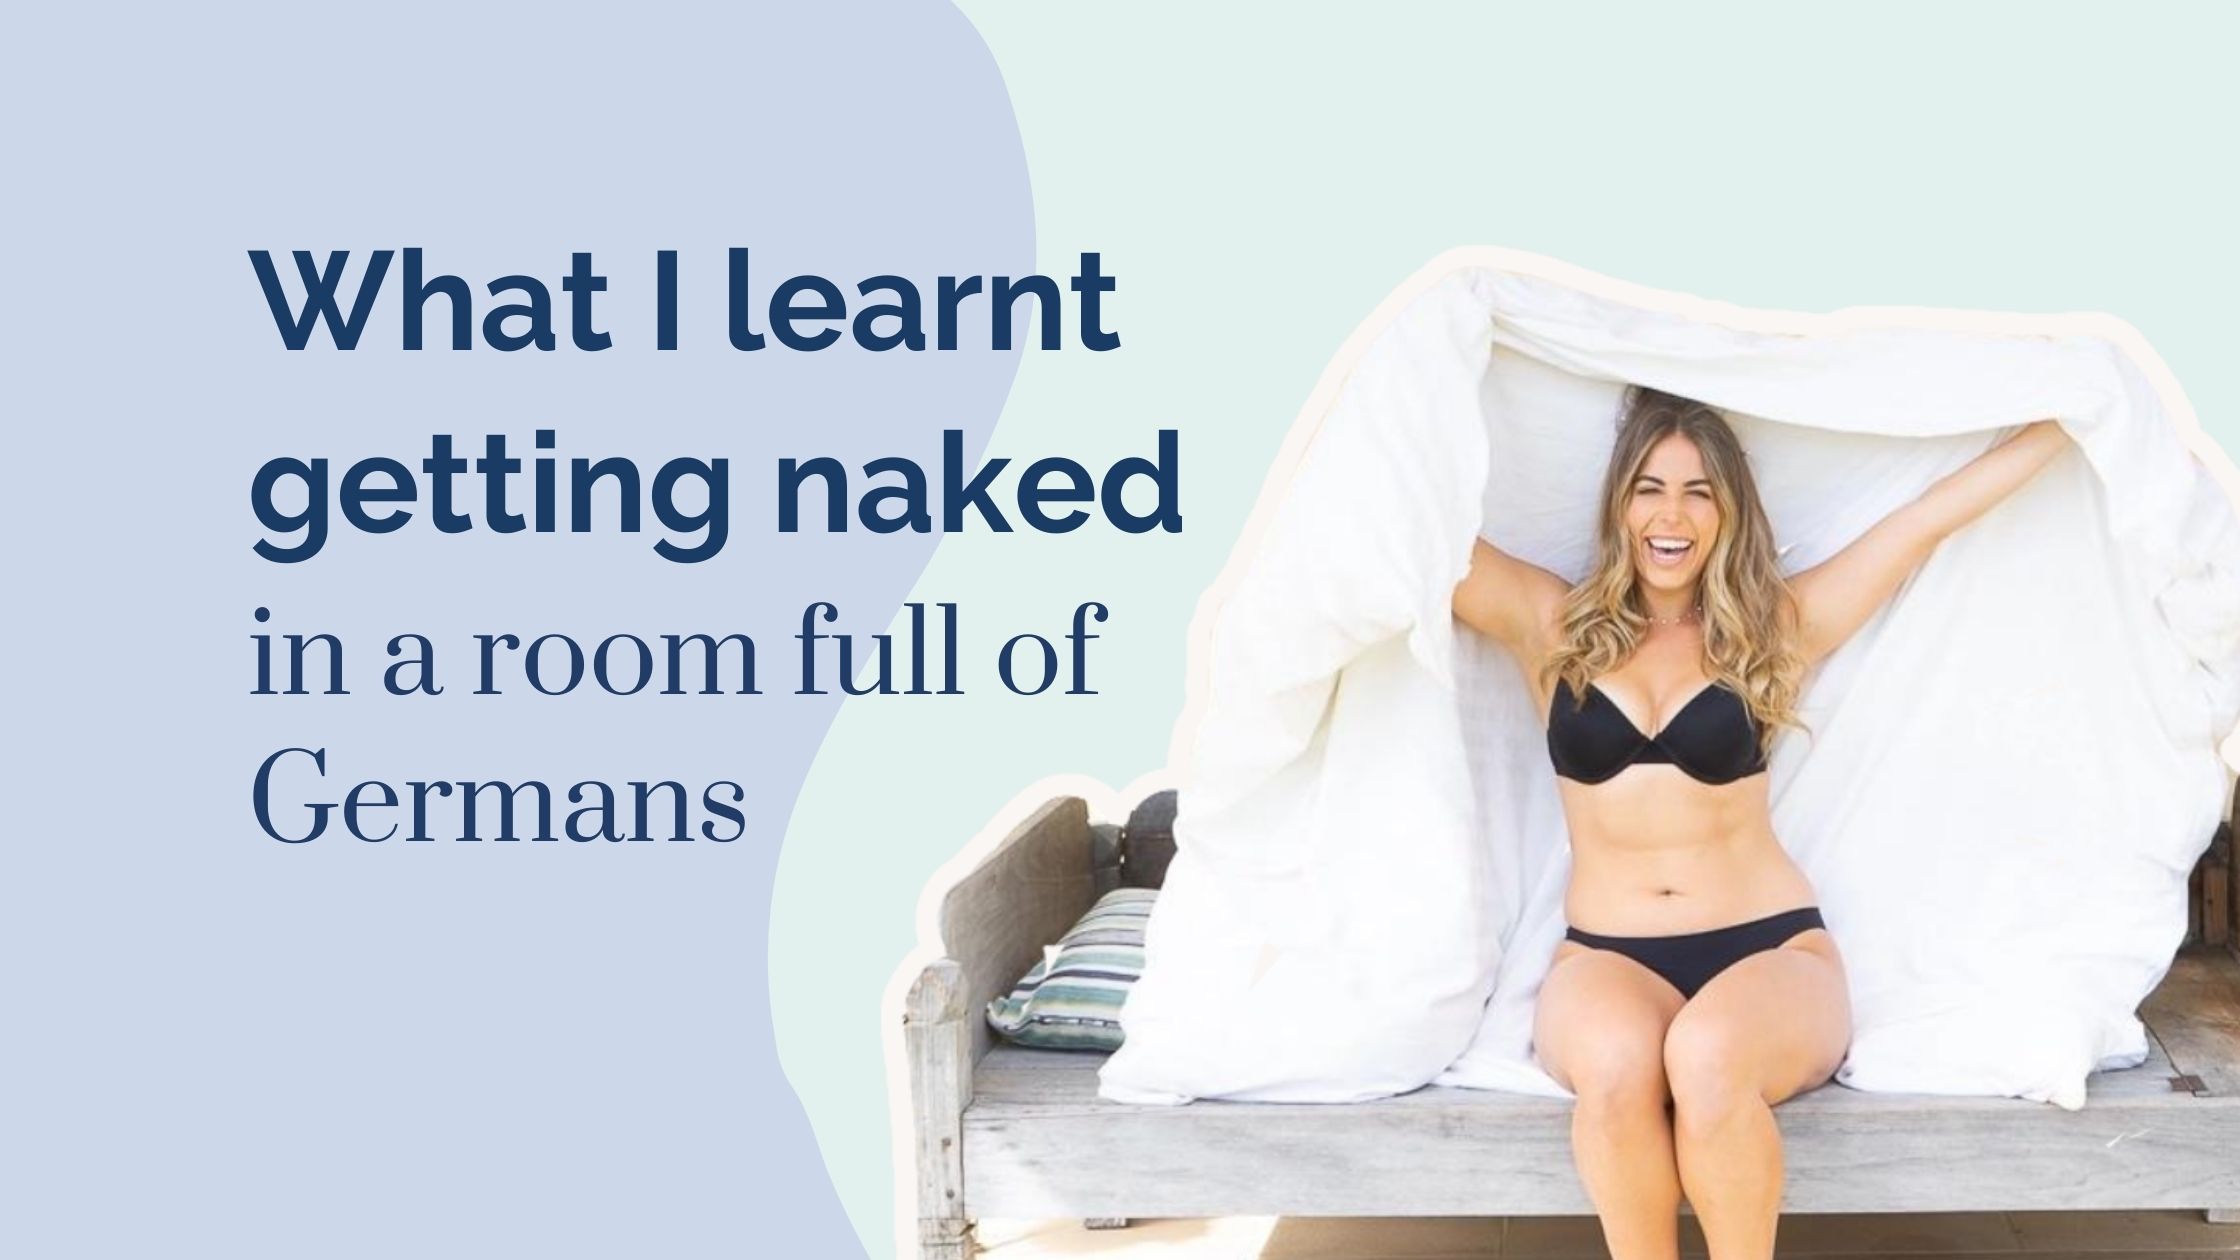 I got naked with a room full of Germans. Here’s what it taught me.